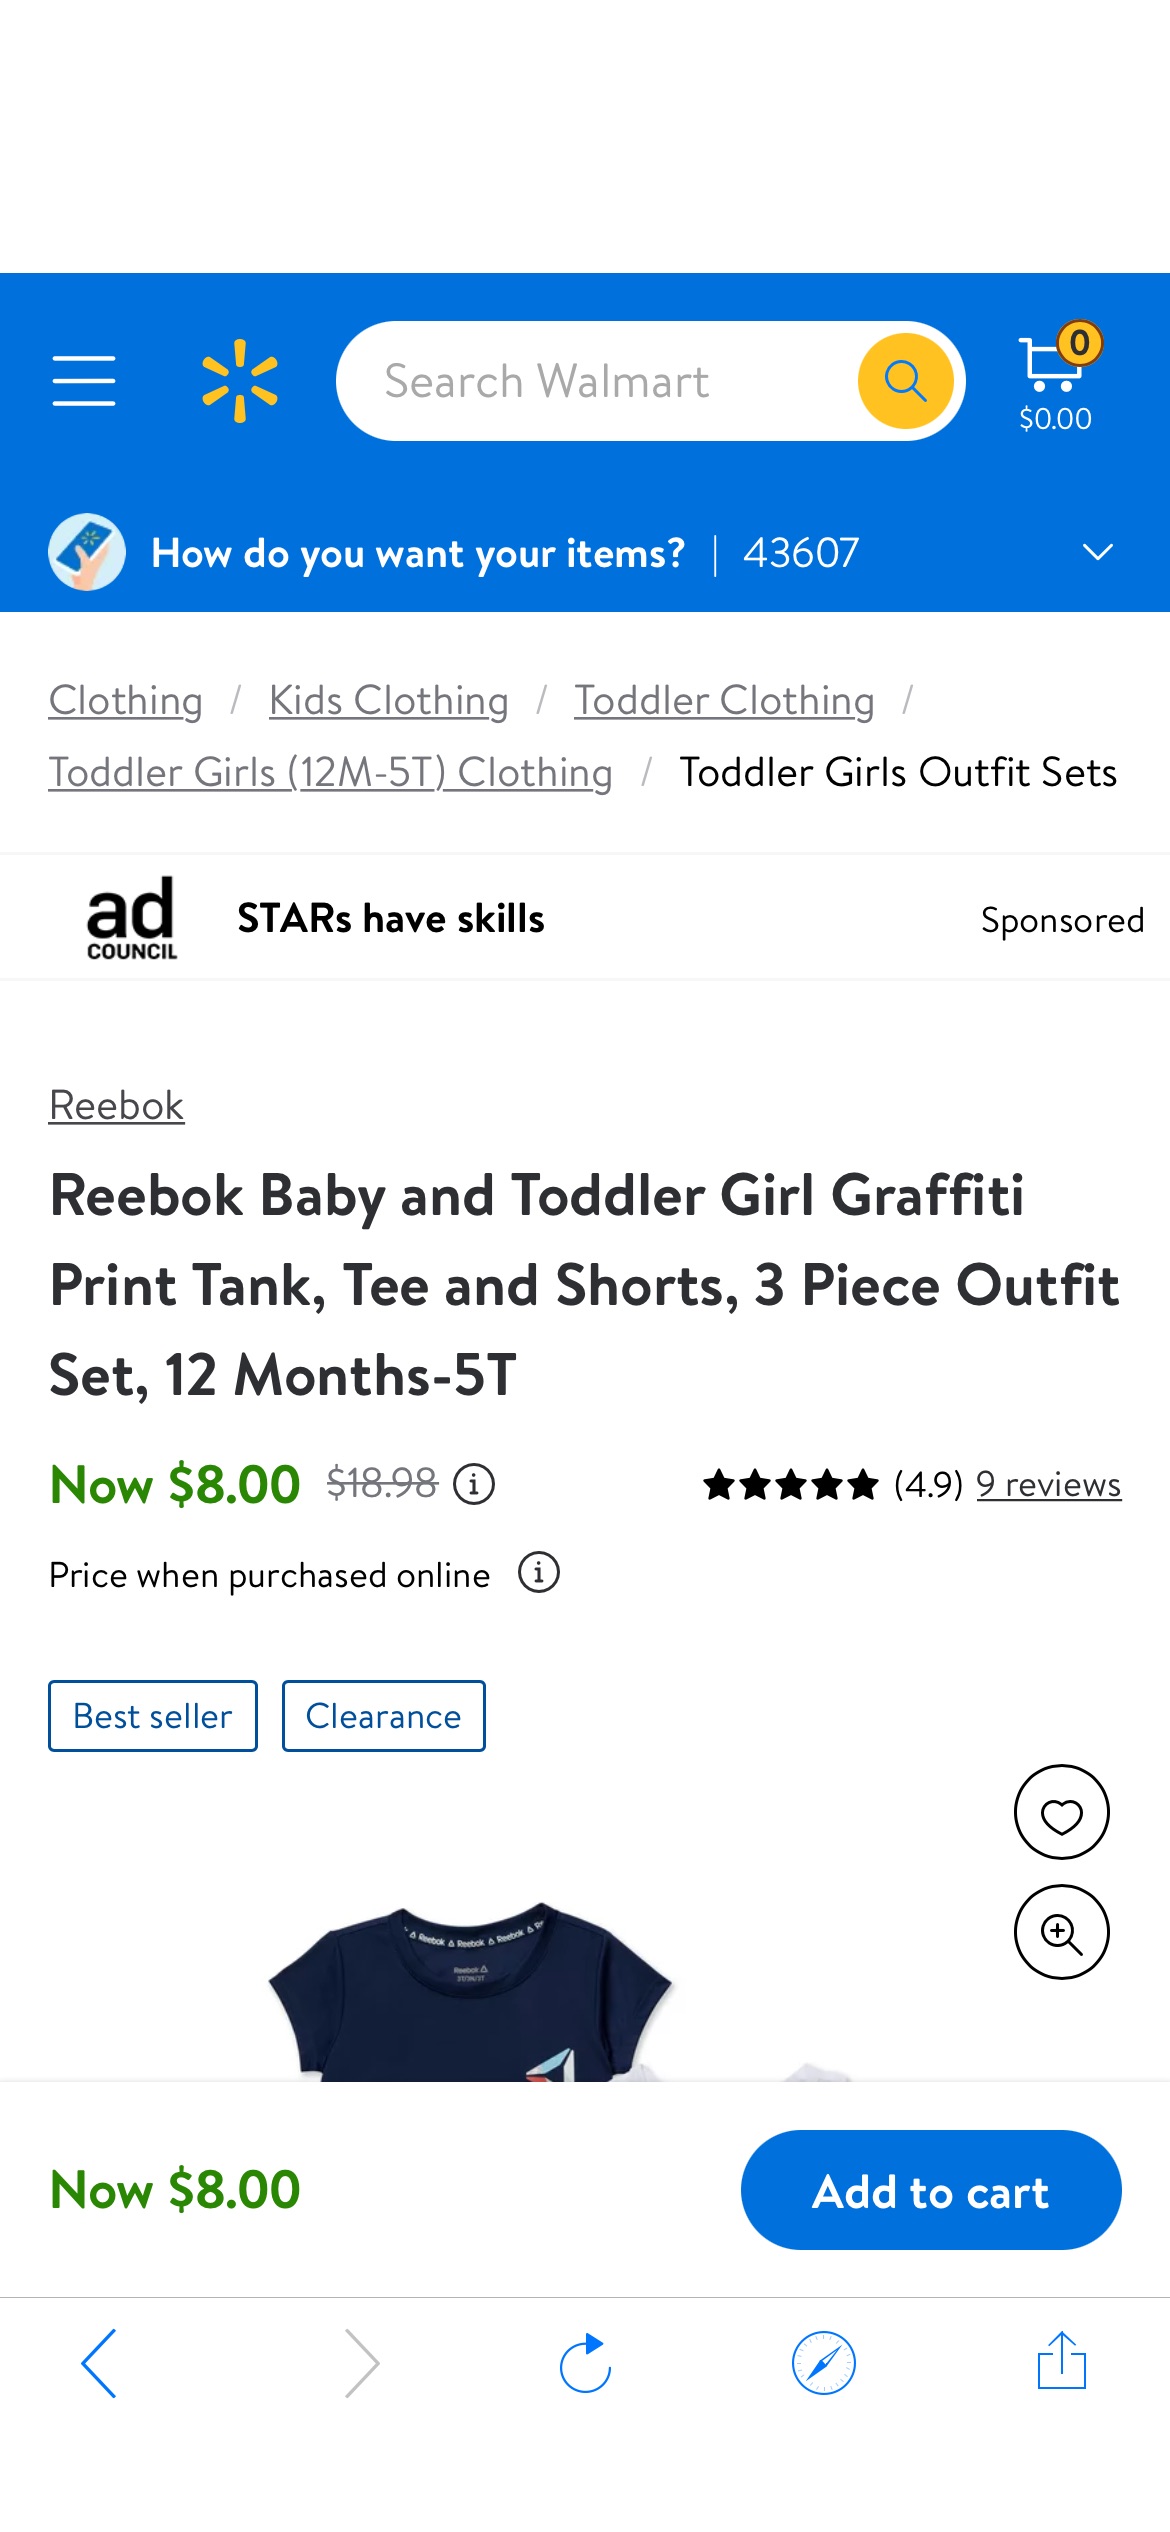 Reebok Baby and Toddler Girl Graffiti Print Tank, Tee and Shorts, 3 件套Outfit Set, 12 Months-5T - Walmart.com